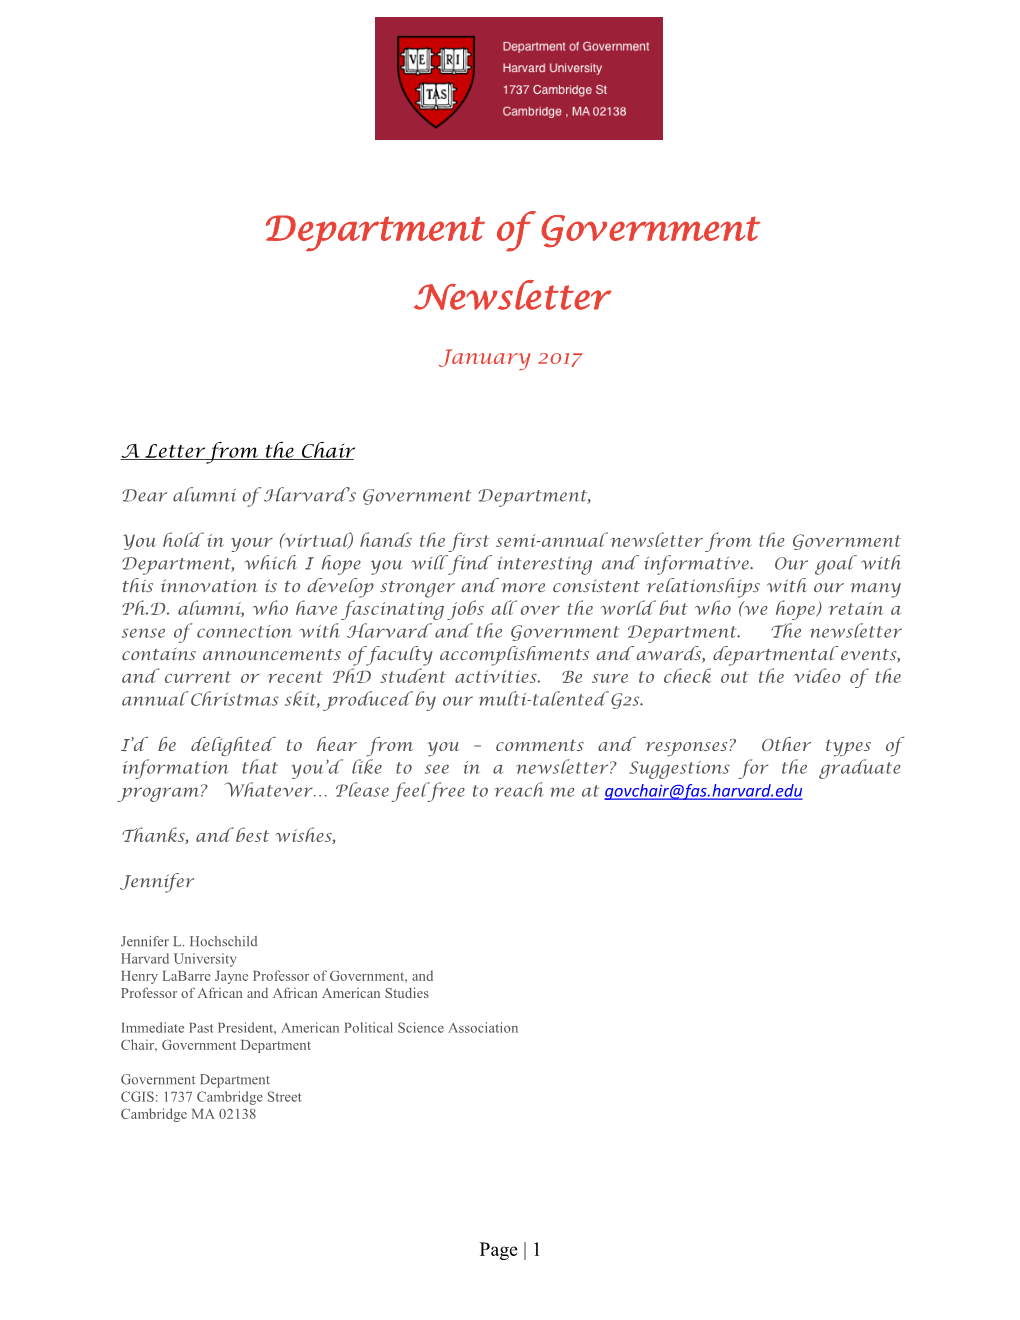 Department of Government Newsletter